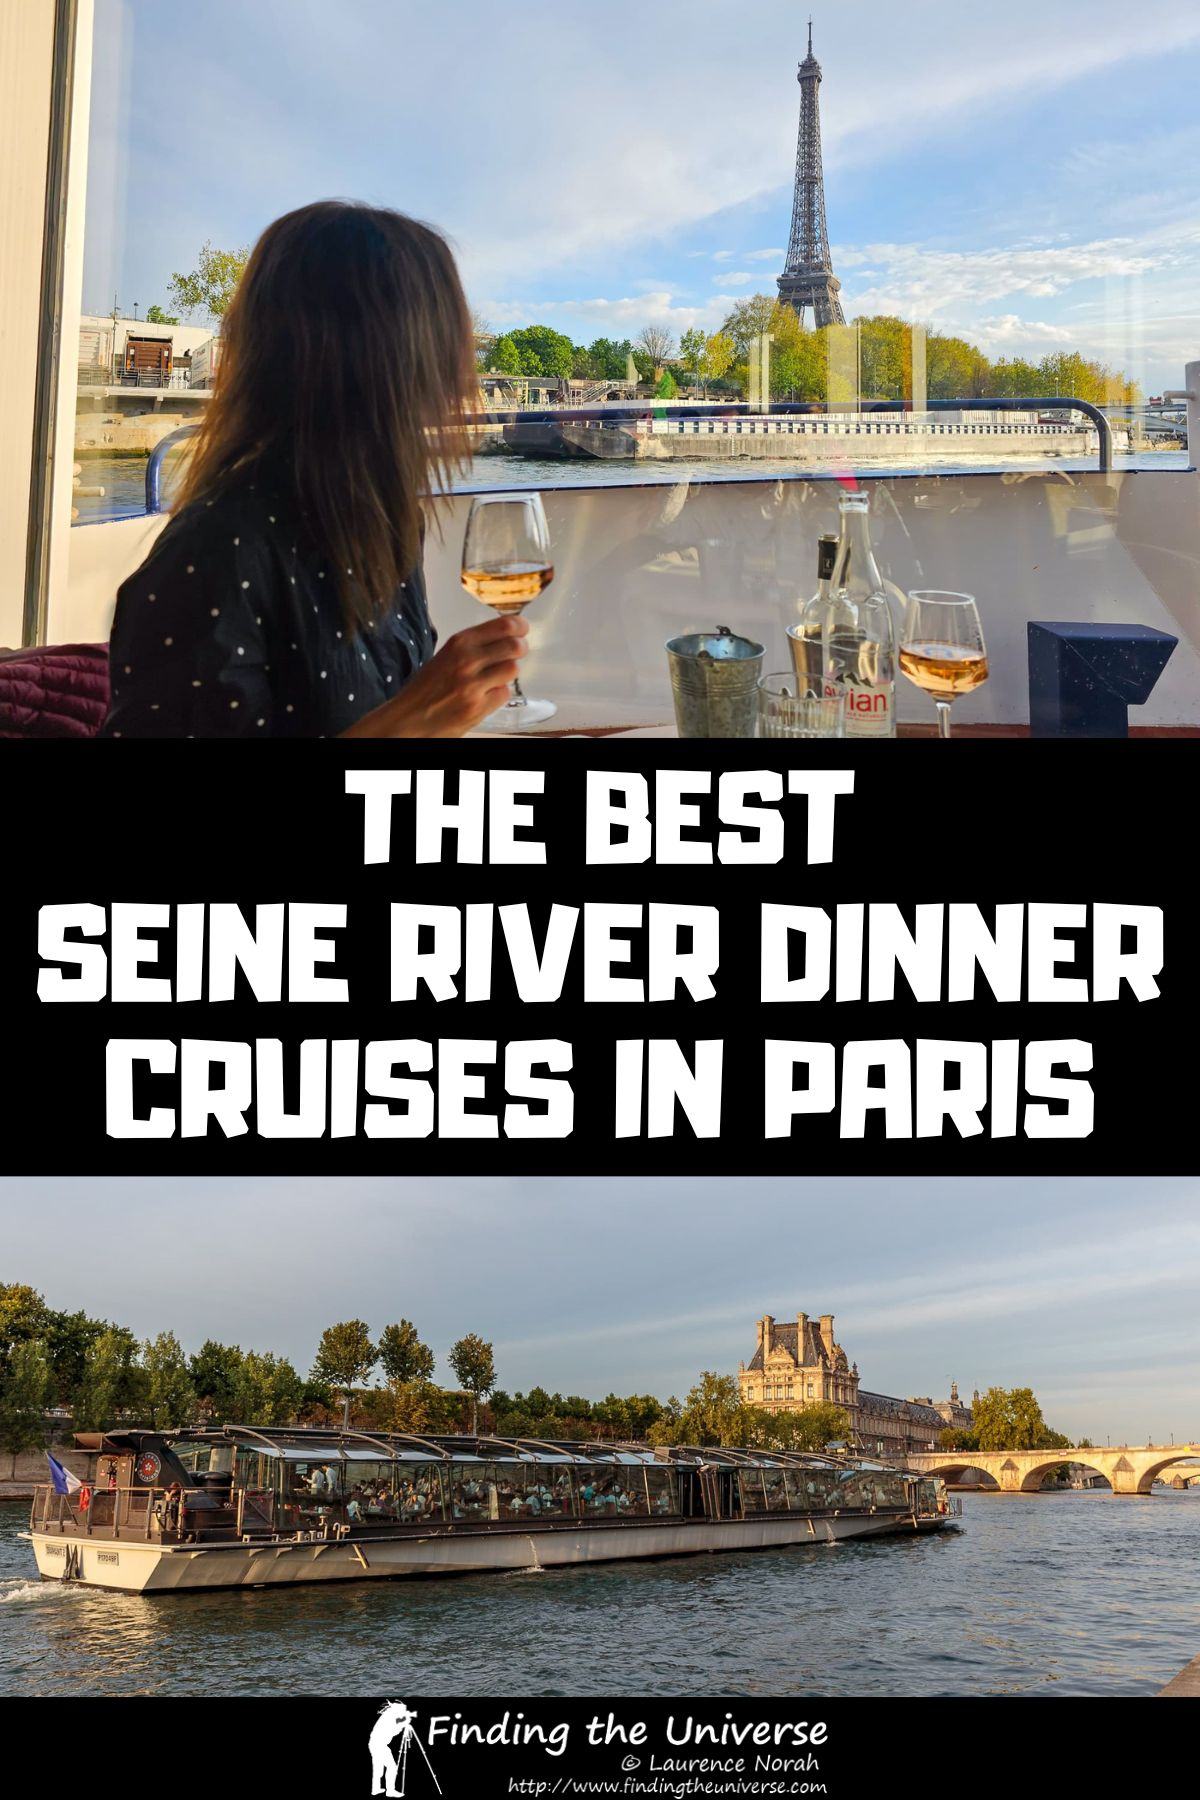 A guide to the best Seine River dinner cruises in Paris. Includes a guide to how to choose a dinner cruise and a list of the best options!